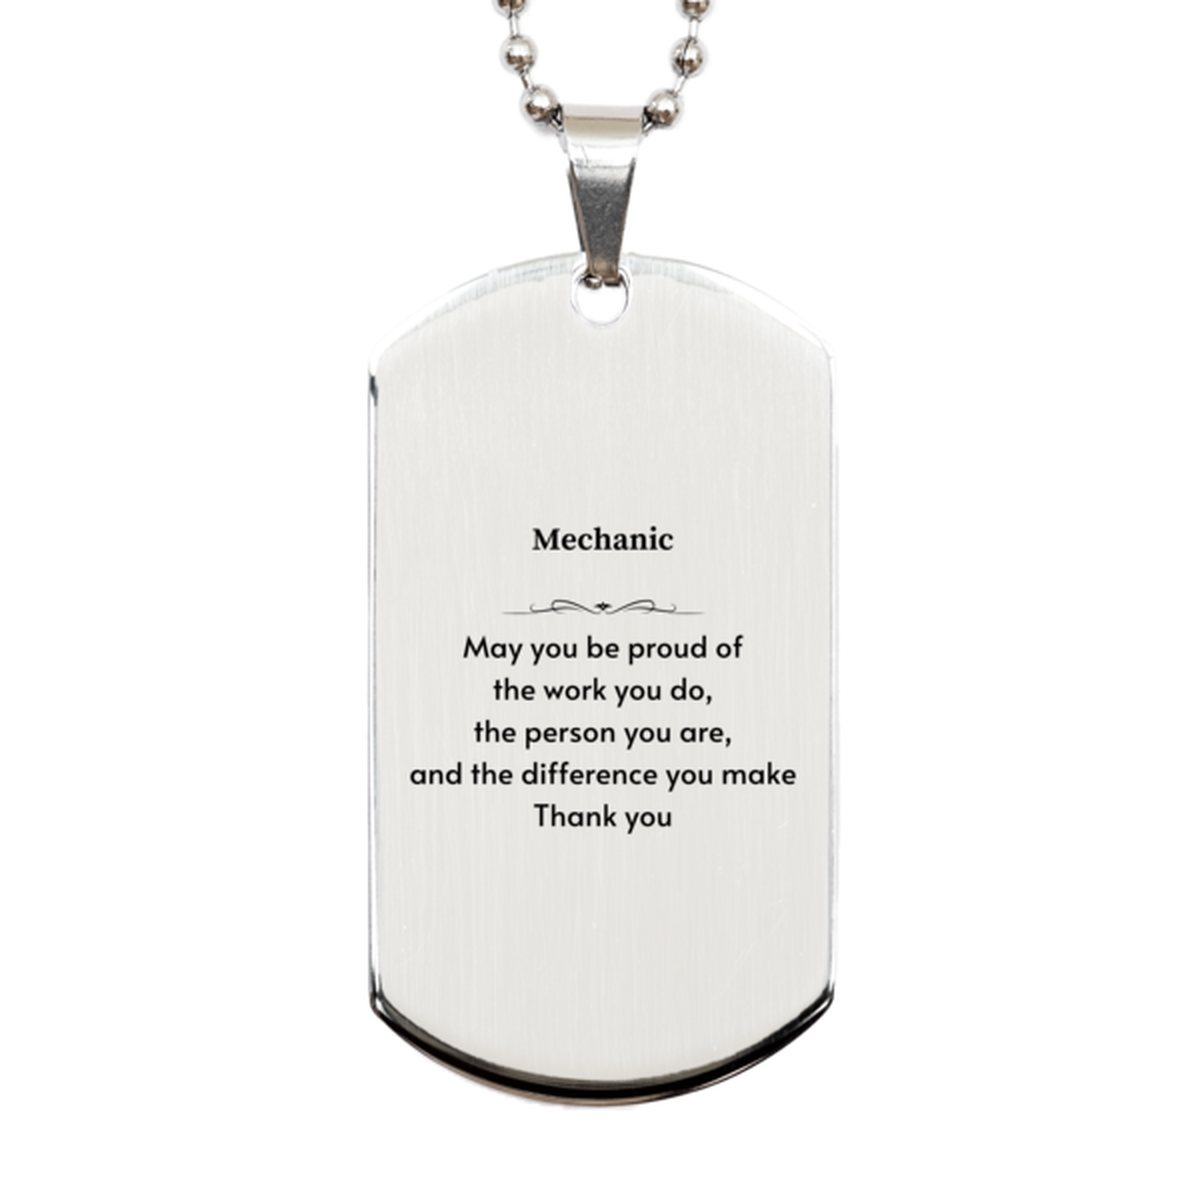 Heartwarming Silver Dog Tag Retirement Coworkers Gifts for Mechanic, Mechanic May You be proud of the work you do, the person you are Gifts for Boss Men Women Friends